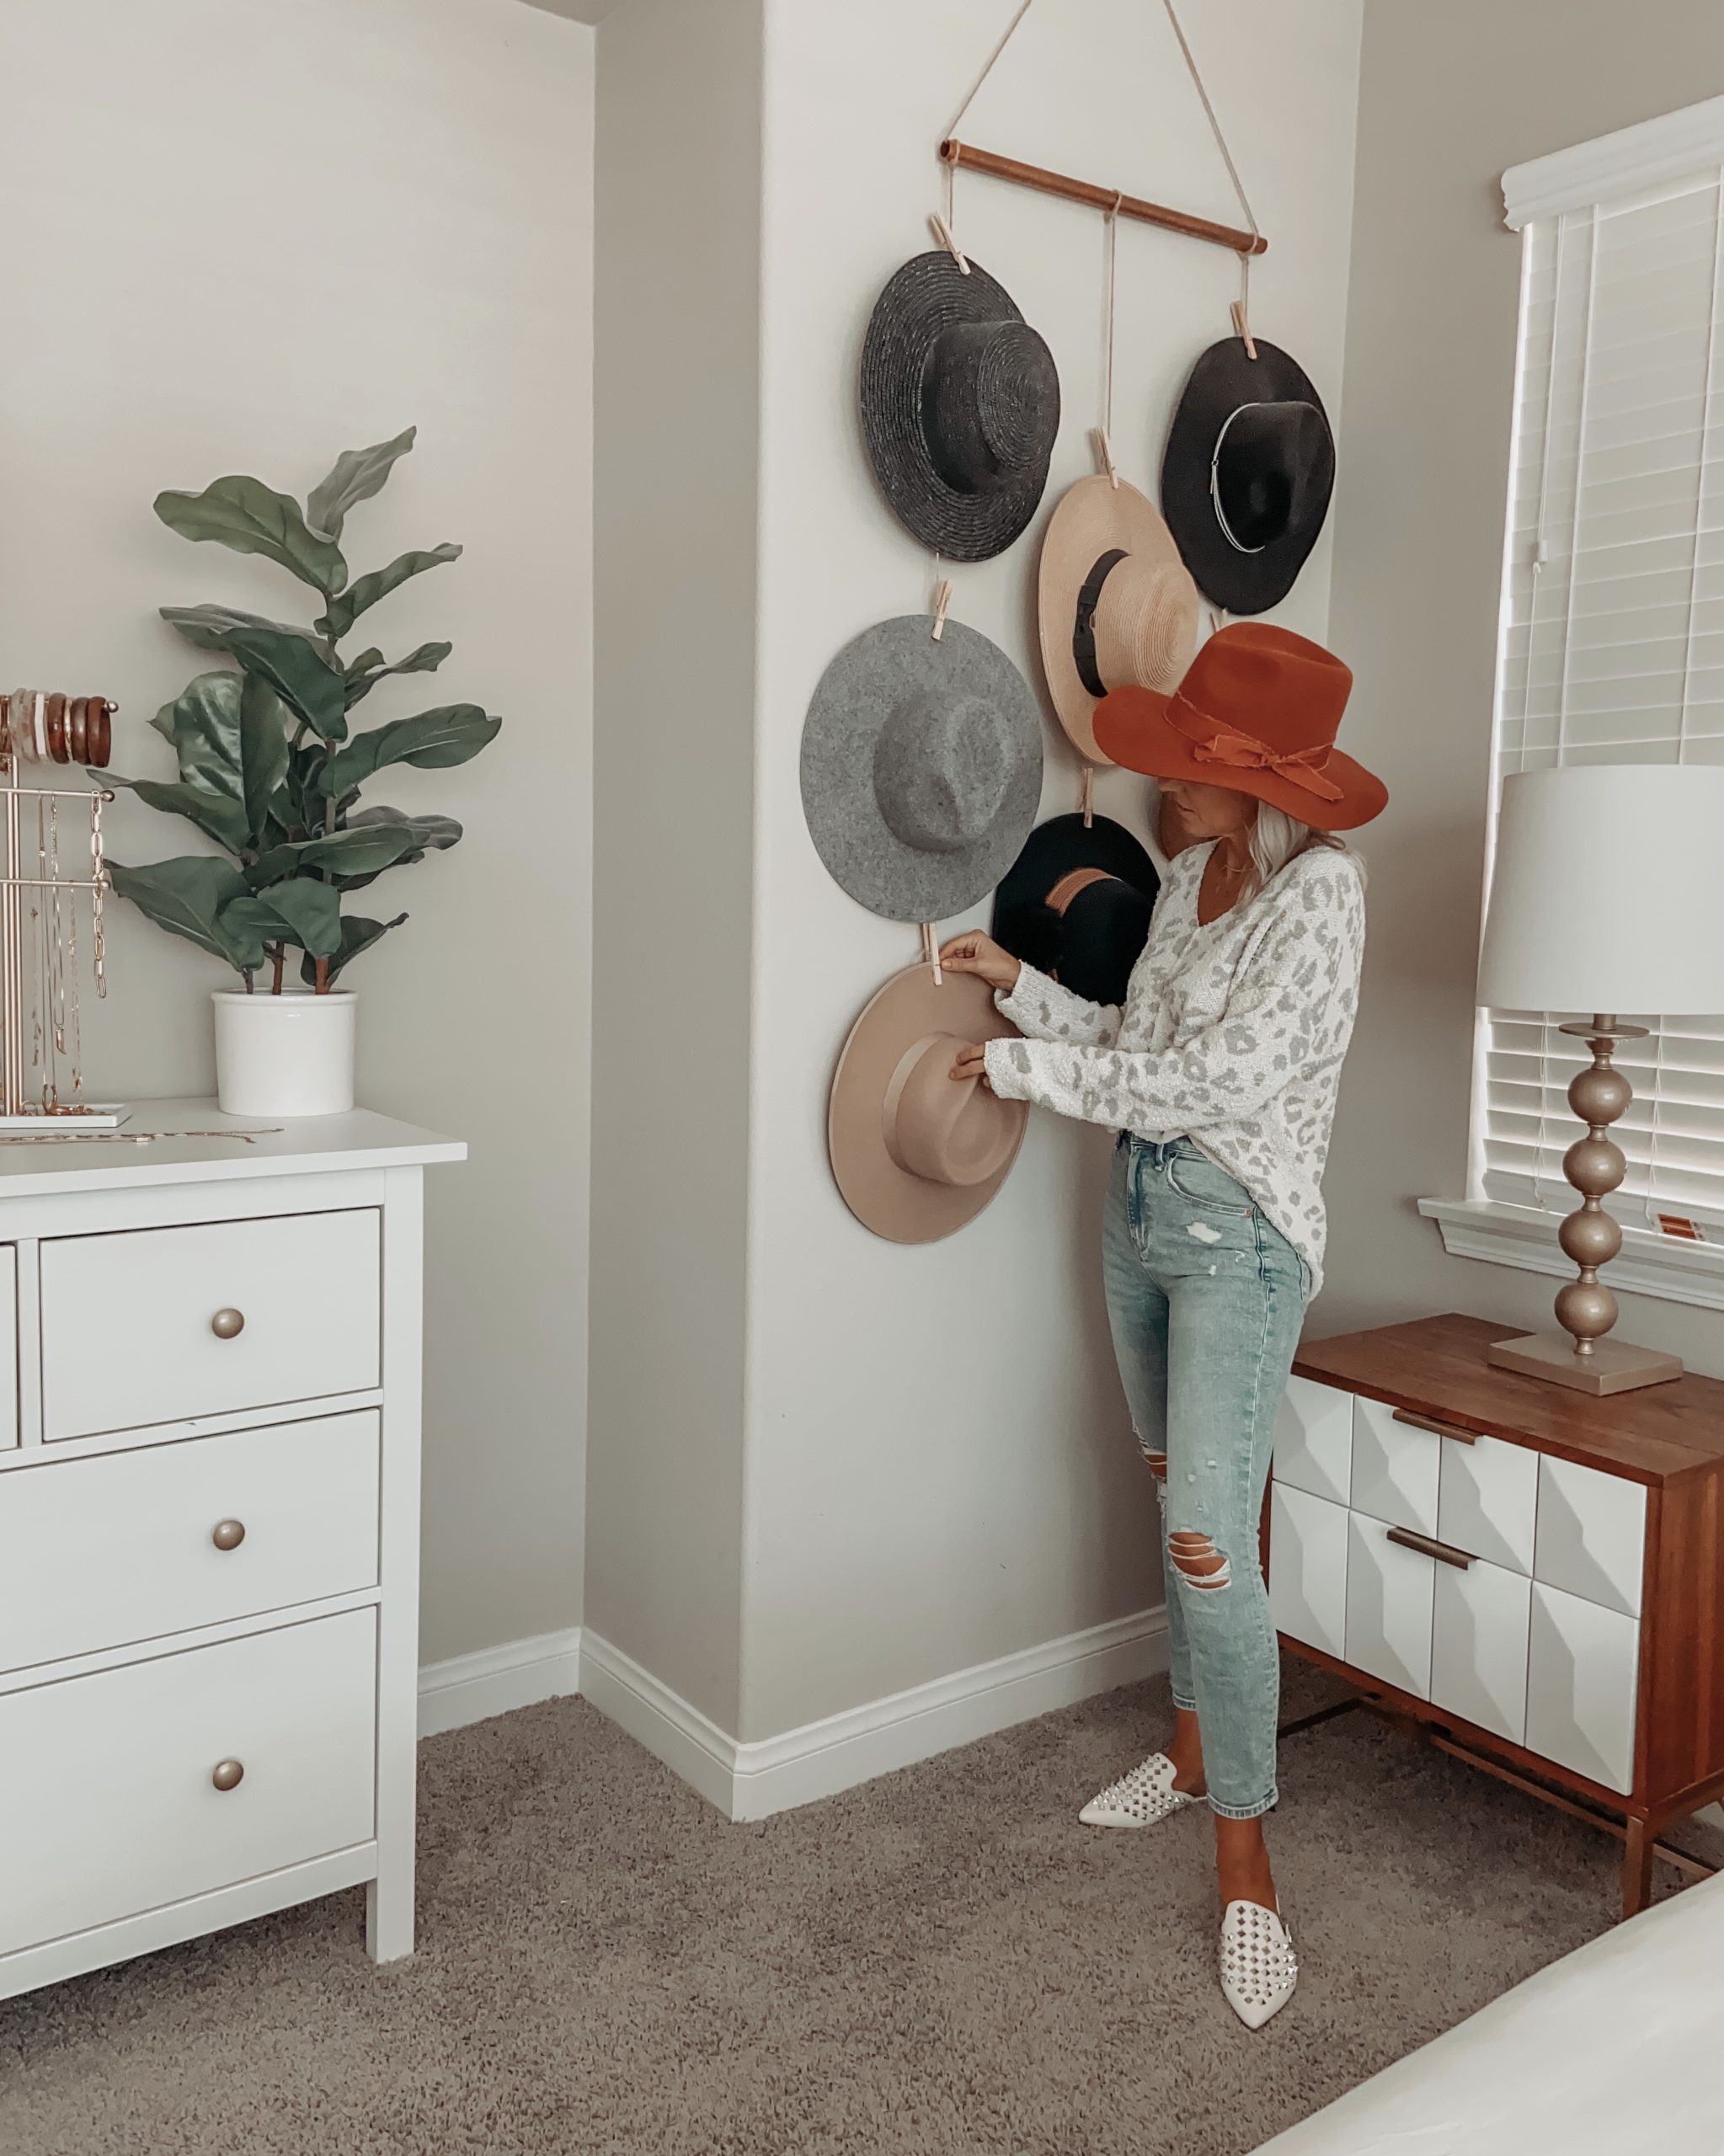 FALL HAT FINDS: SAVE VS SPLURGE + jaclyn De Leon Style- Sharing my latest hat favorites for Fall including must have splurges and great save options